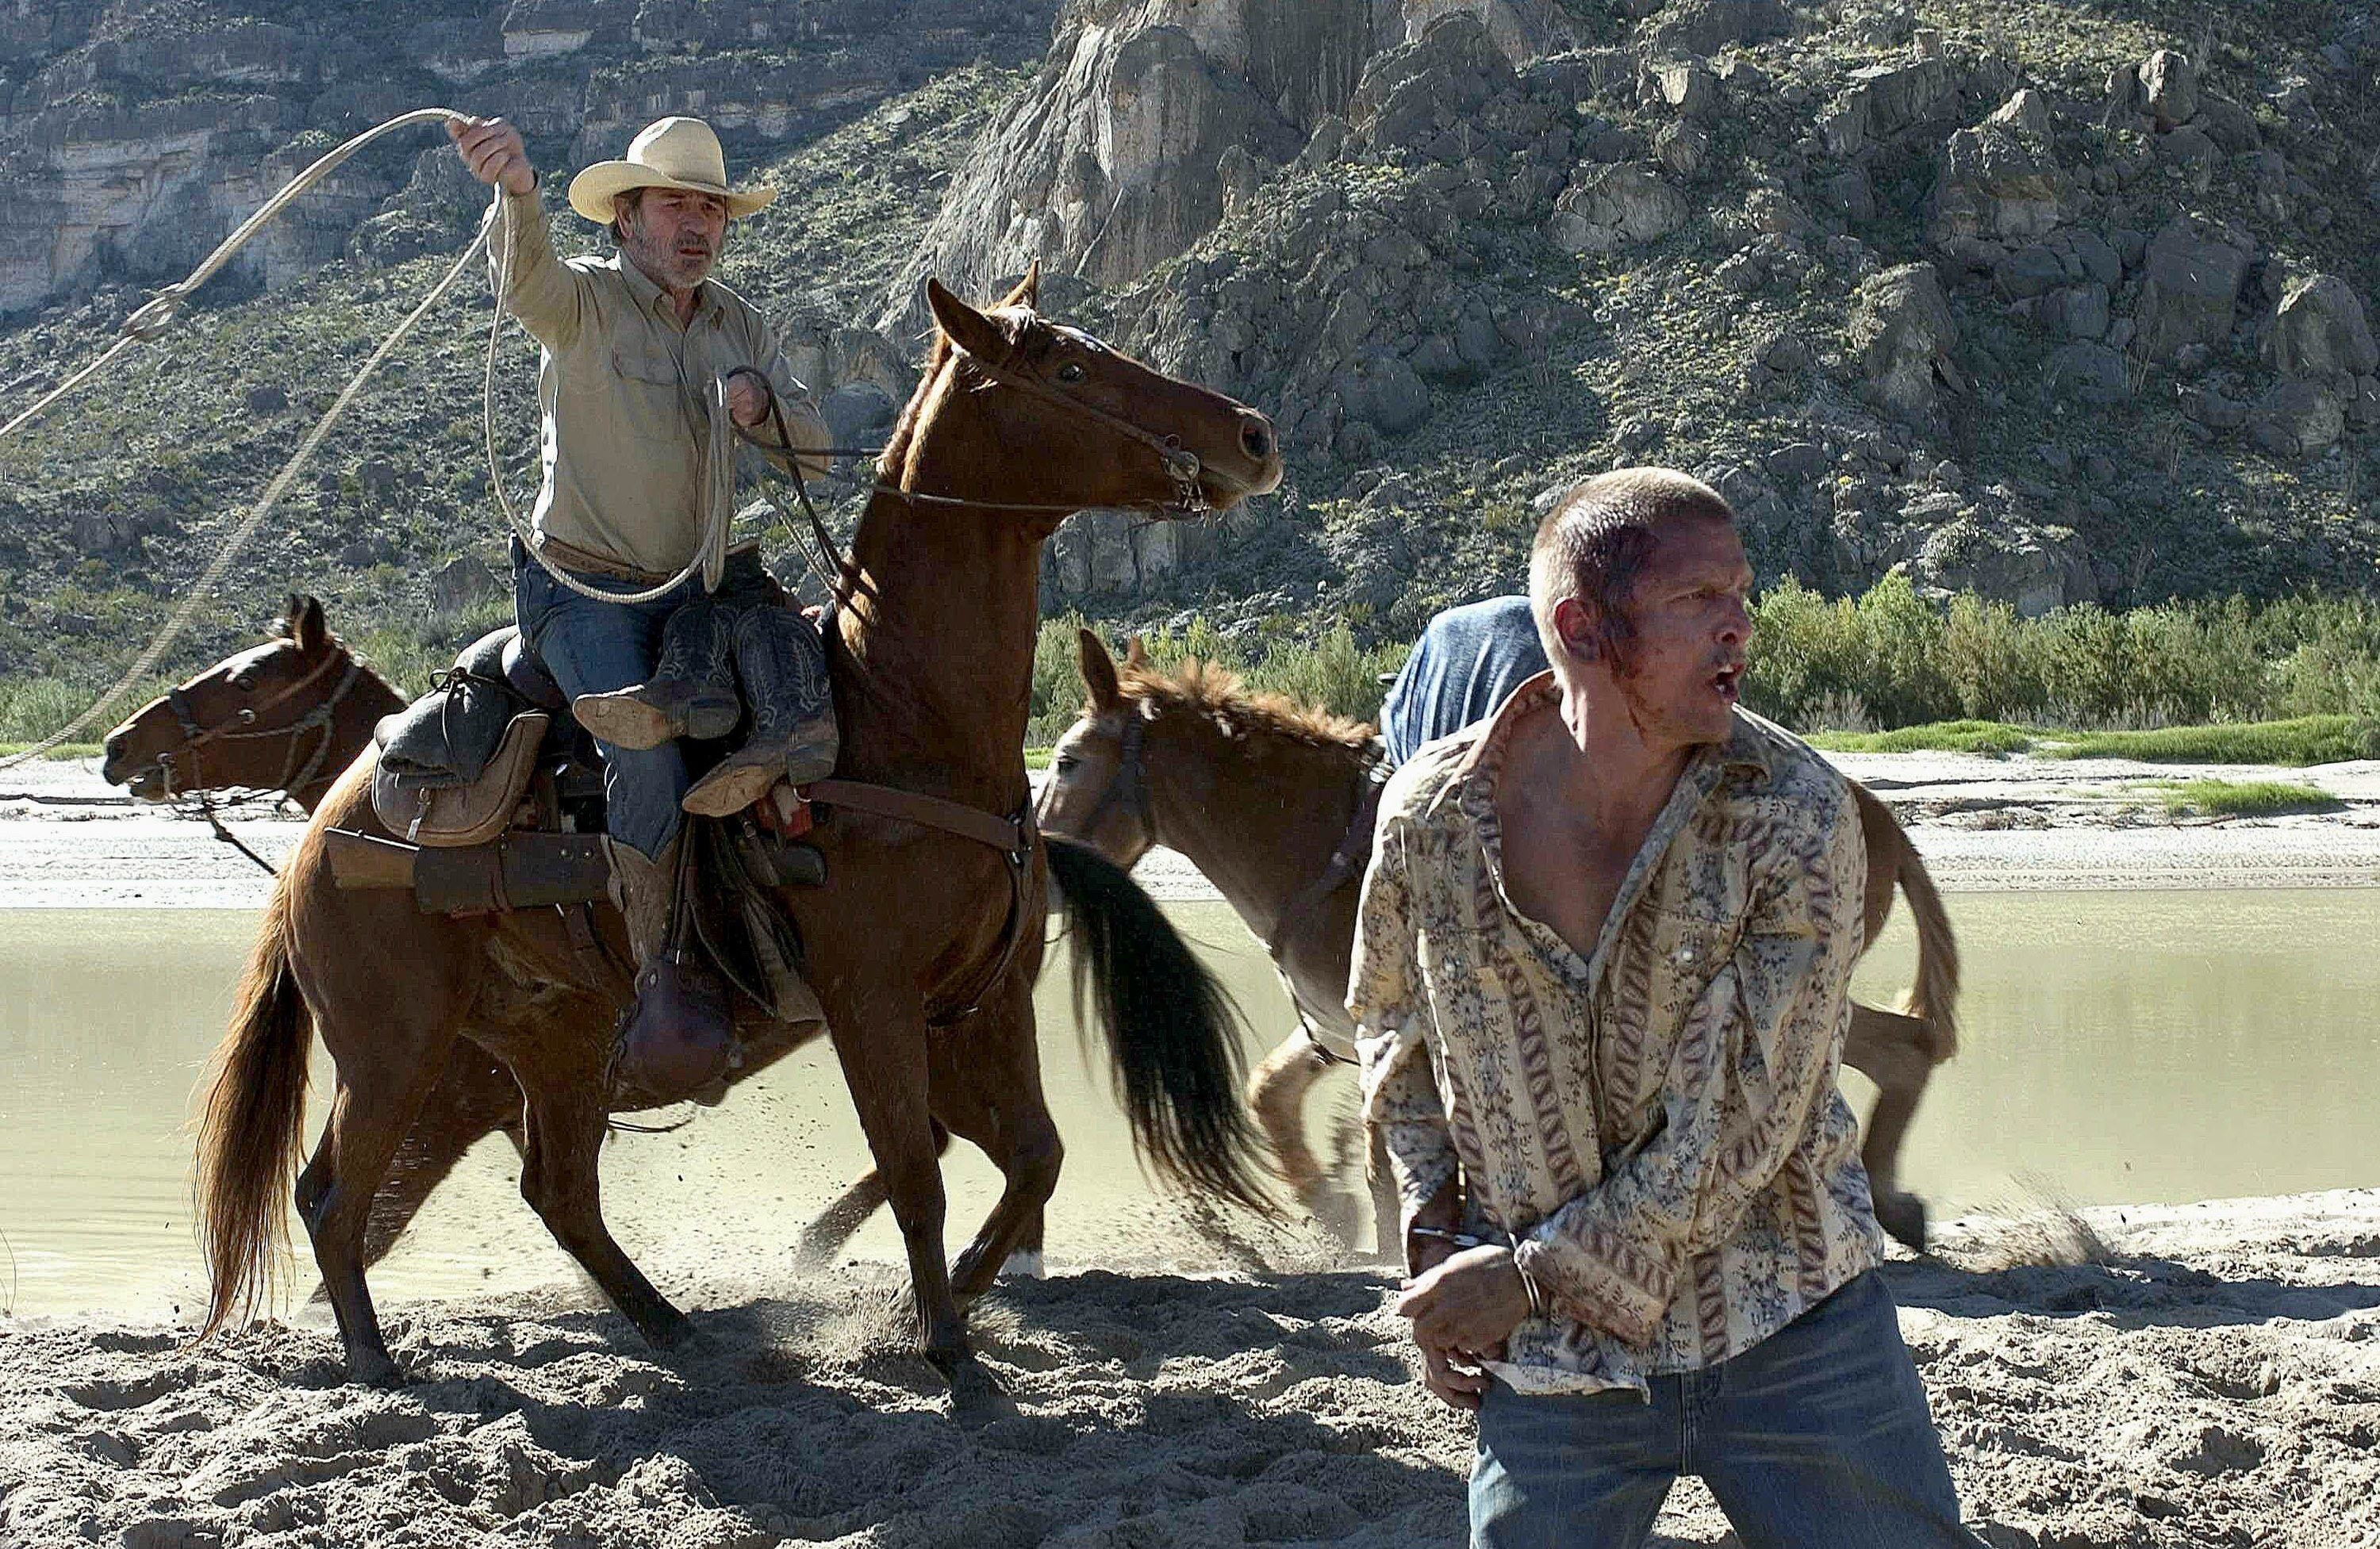 A bloodied man attempts to run from a cowboy on a horse with a lasso